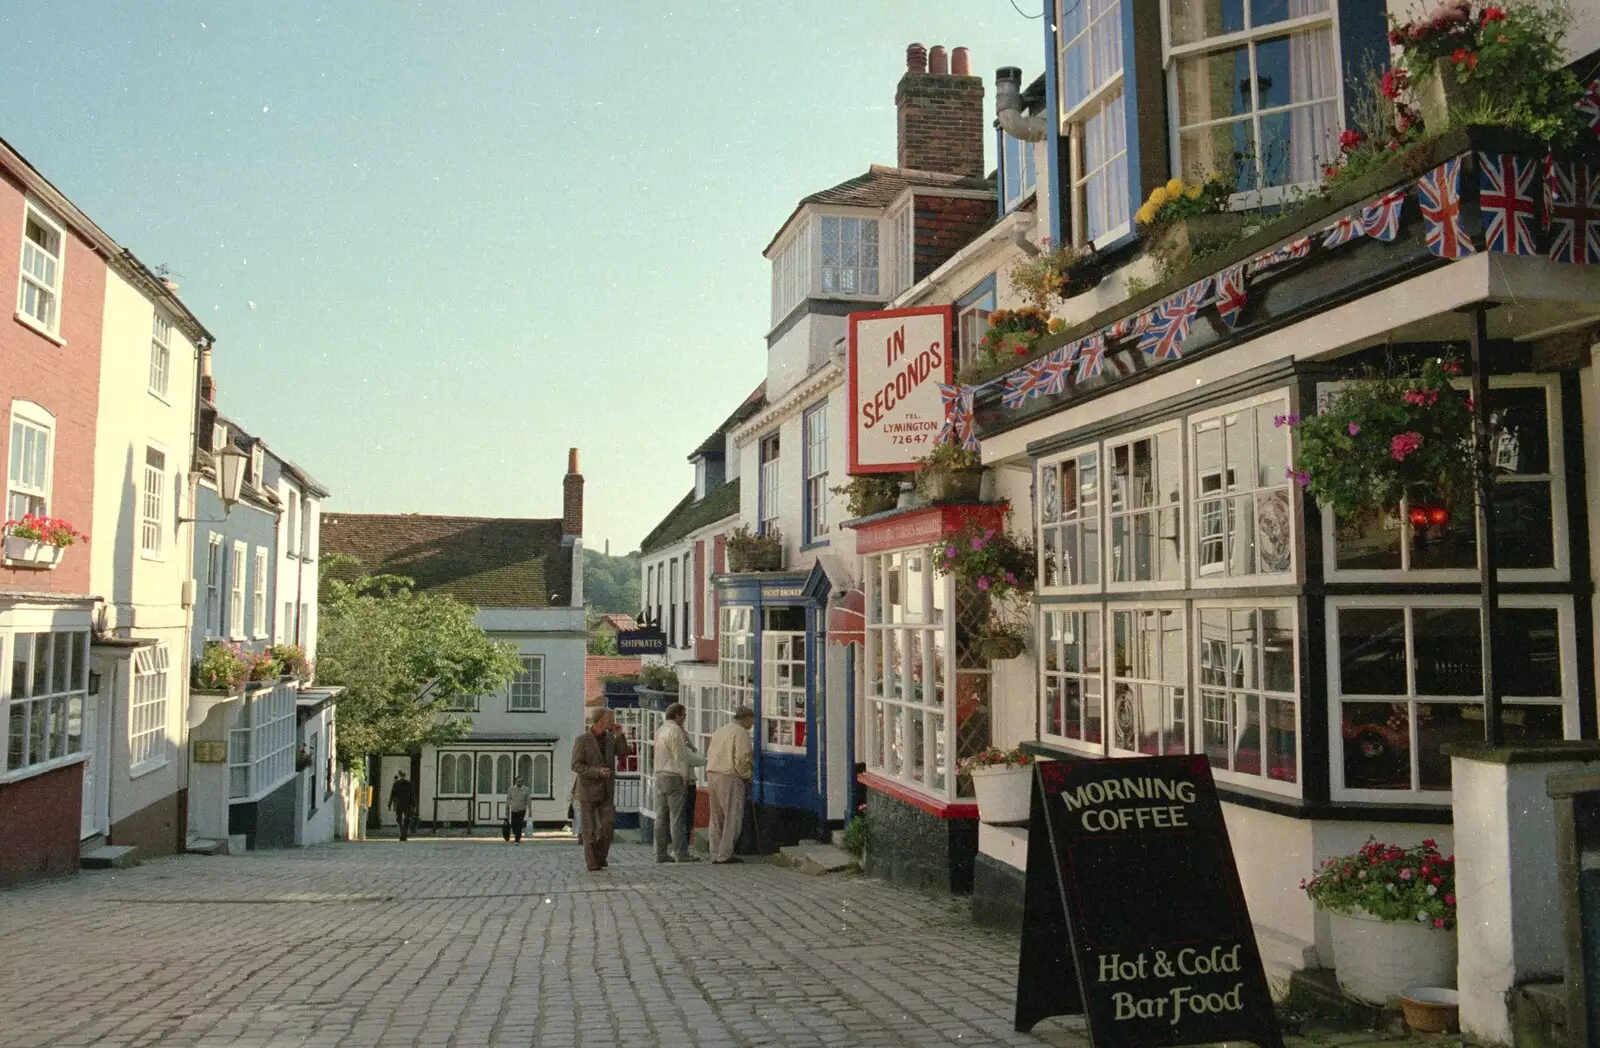 The Kings Head pub on Quay Hill, Lymington, from A Walk in the New Forest, Hampshire - 27th July 1989